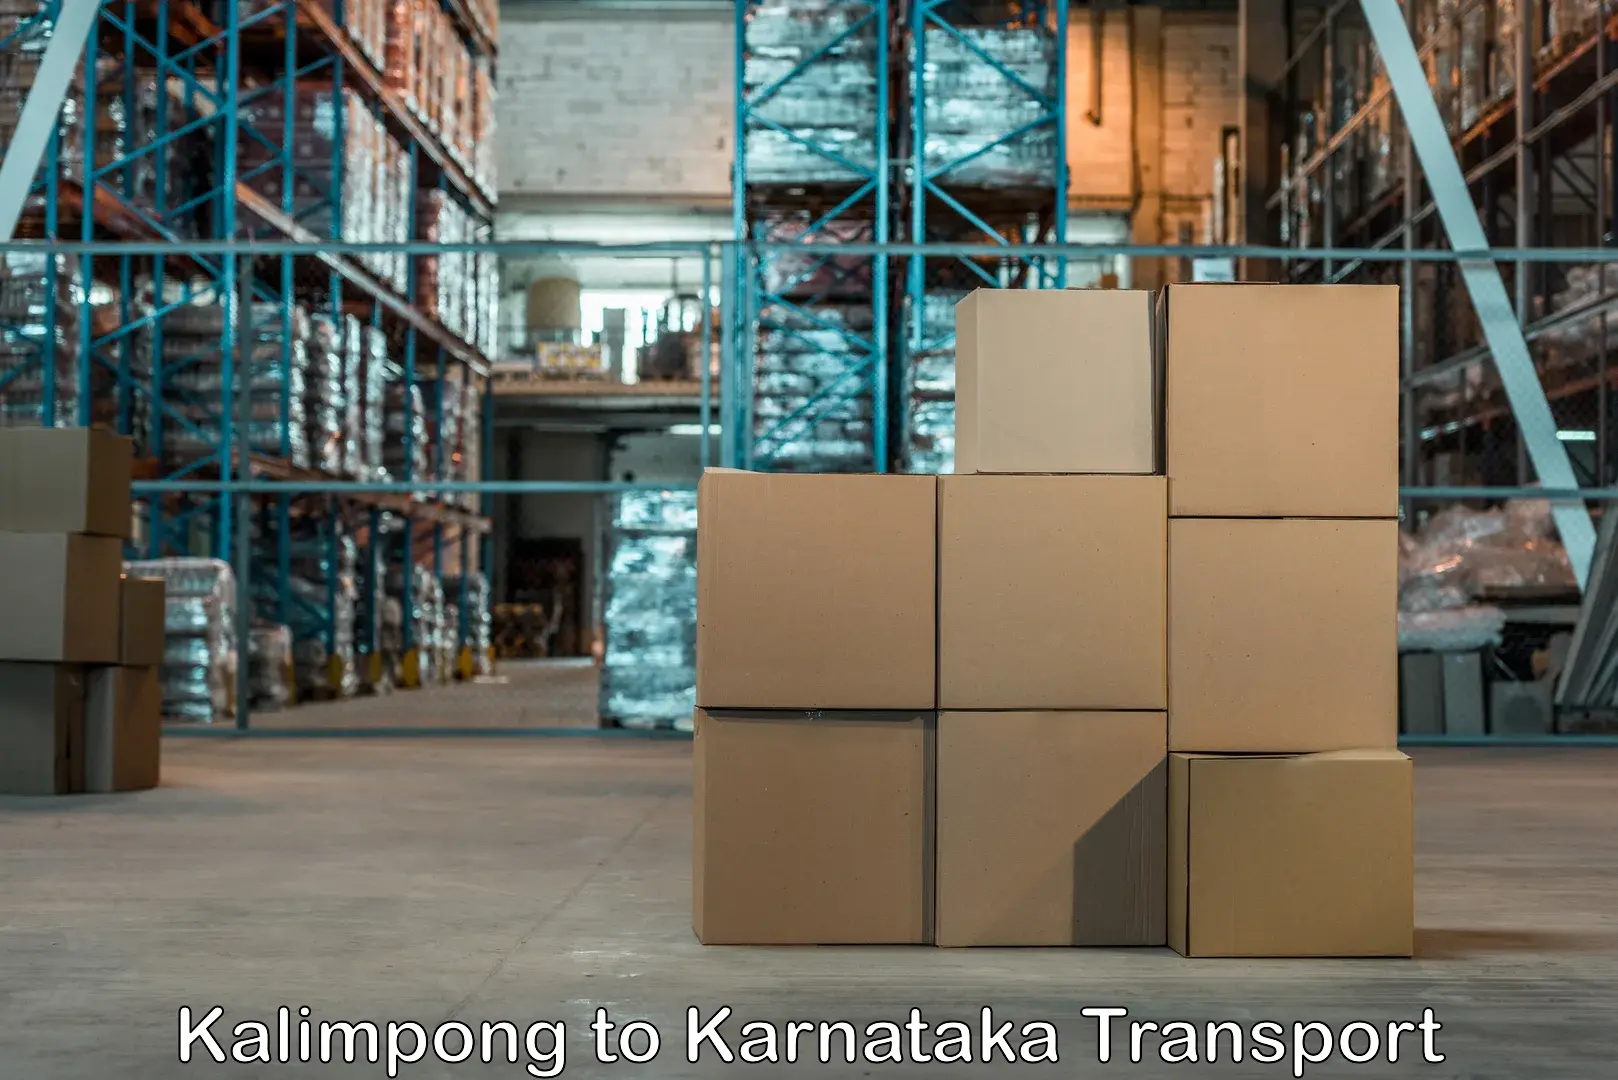 Truck transport companies in India Kalimpong to Bangalore